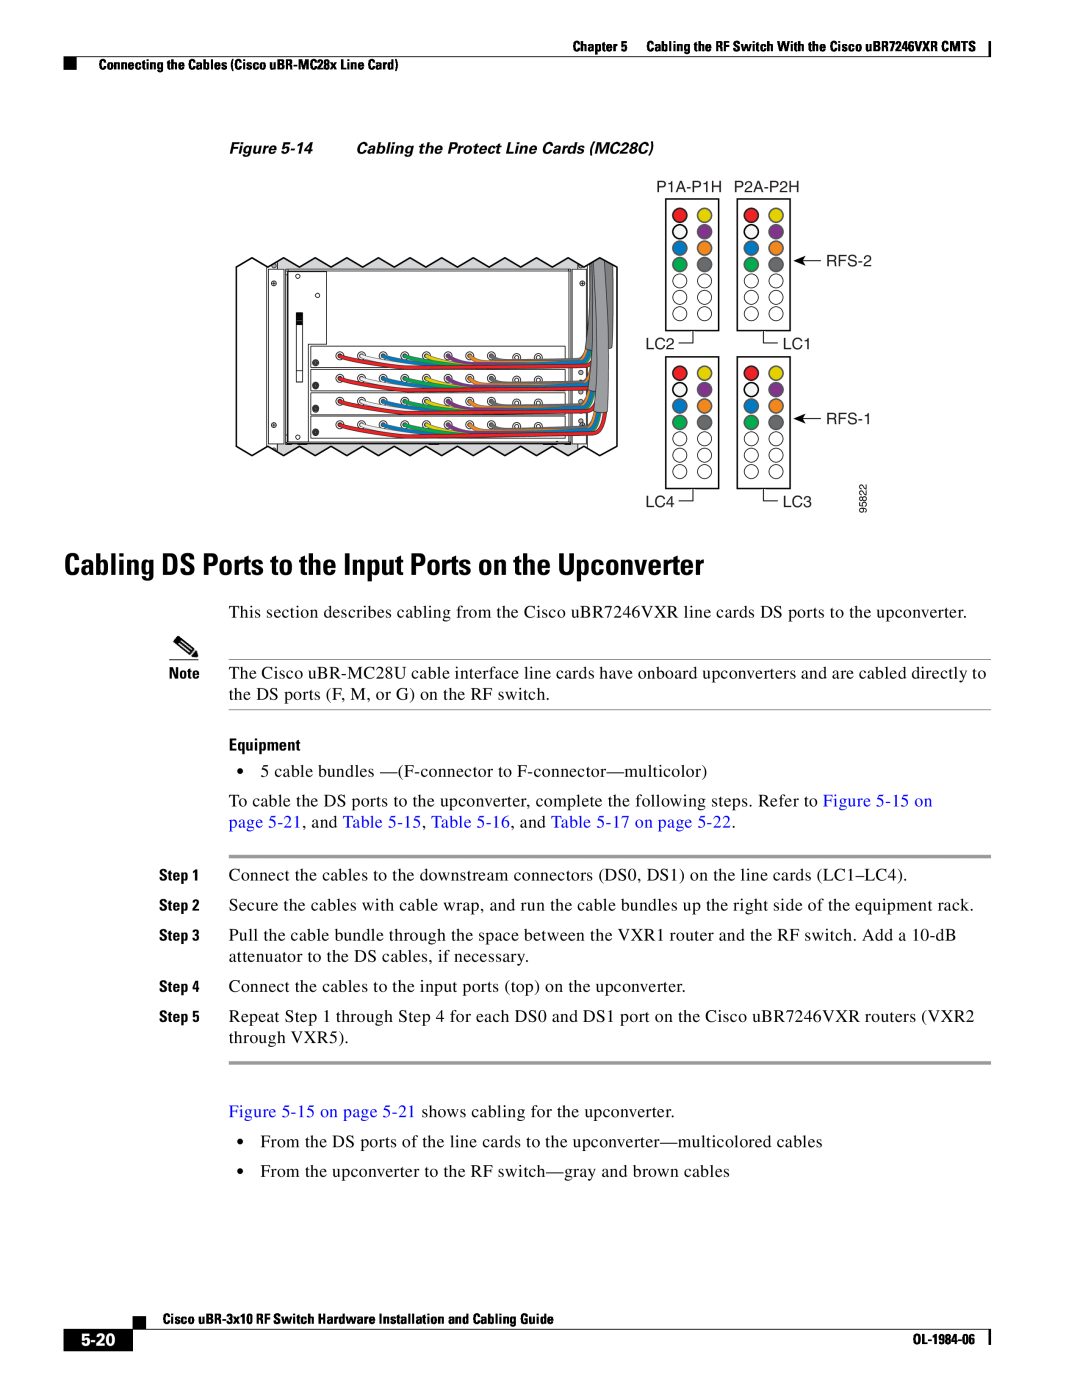 Cisco Systems UBR-3X10 manual Cabling DS Ports to the Input Ports on the Upconverter, 5-20 